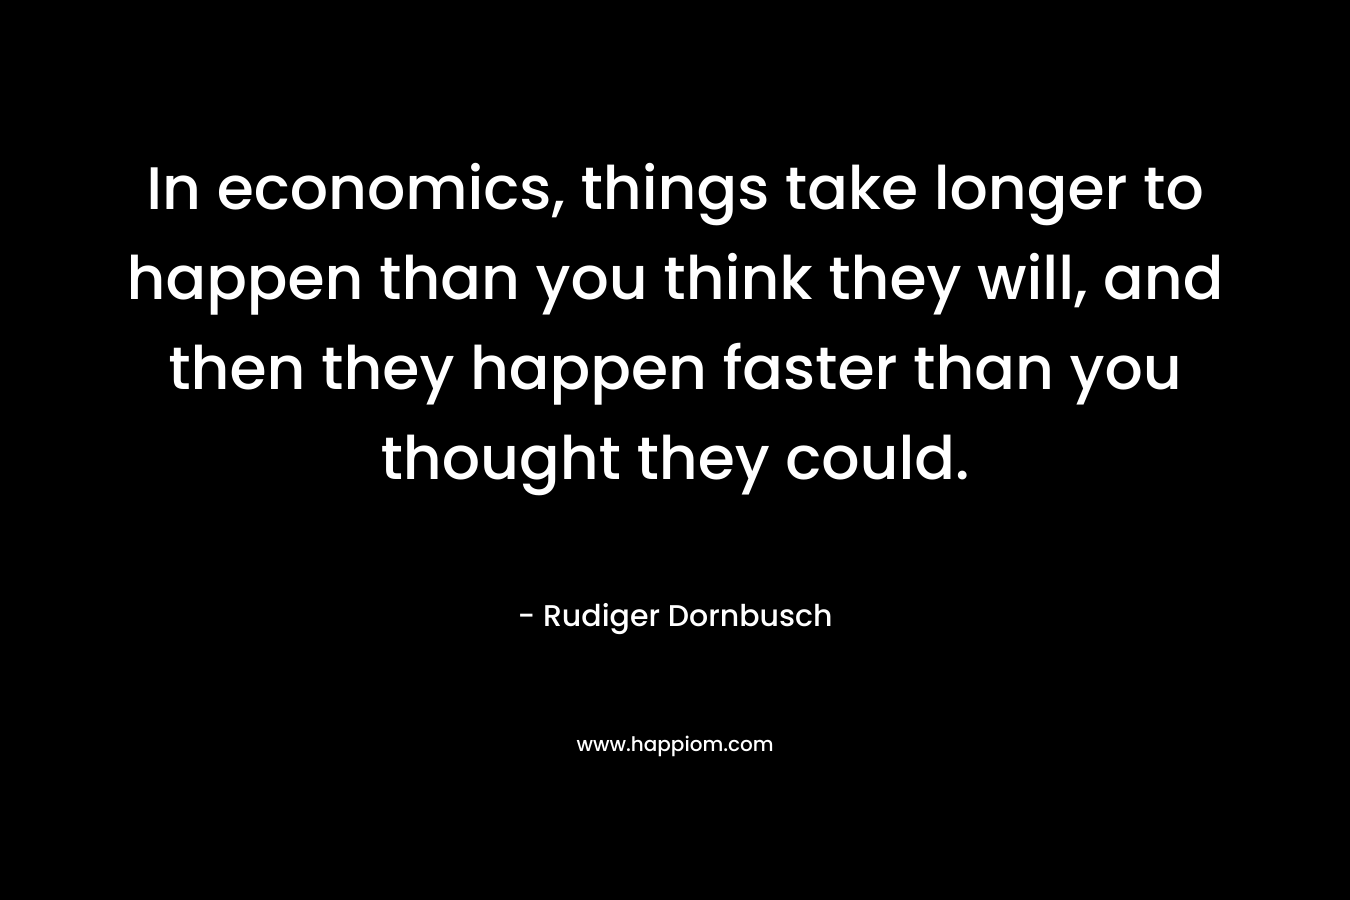 In economics, things take longer to happen than you think they will, and then they happen faster than you thought they could. – Rudiger Dornbusch